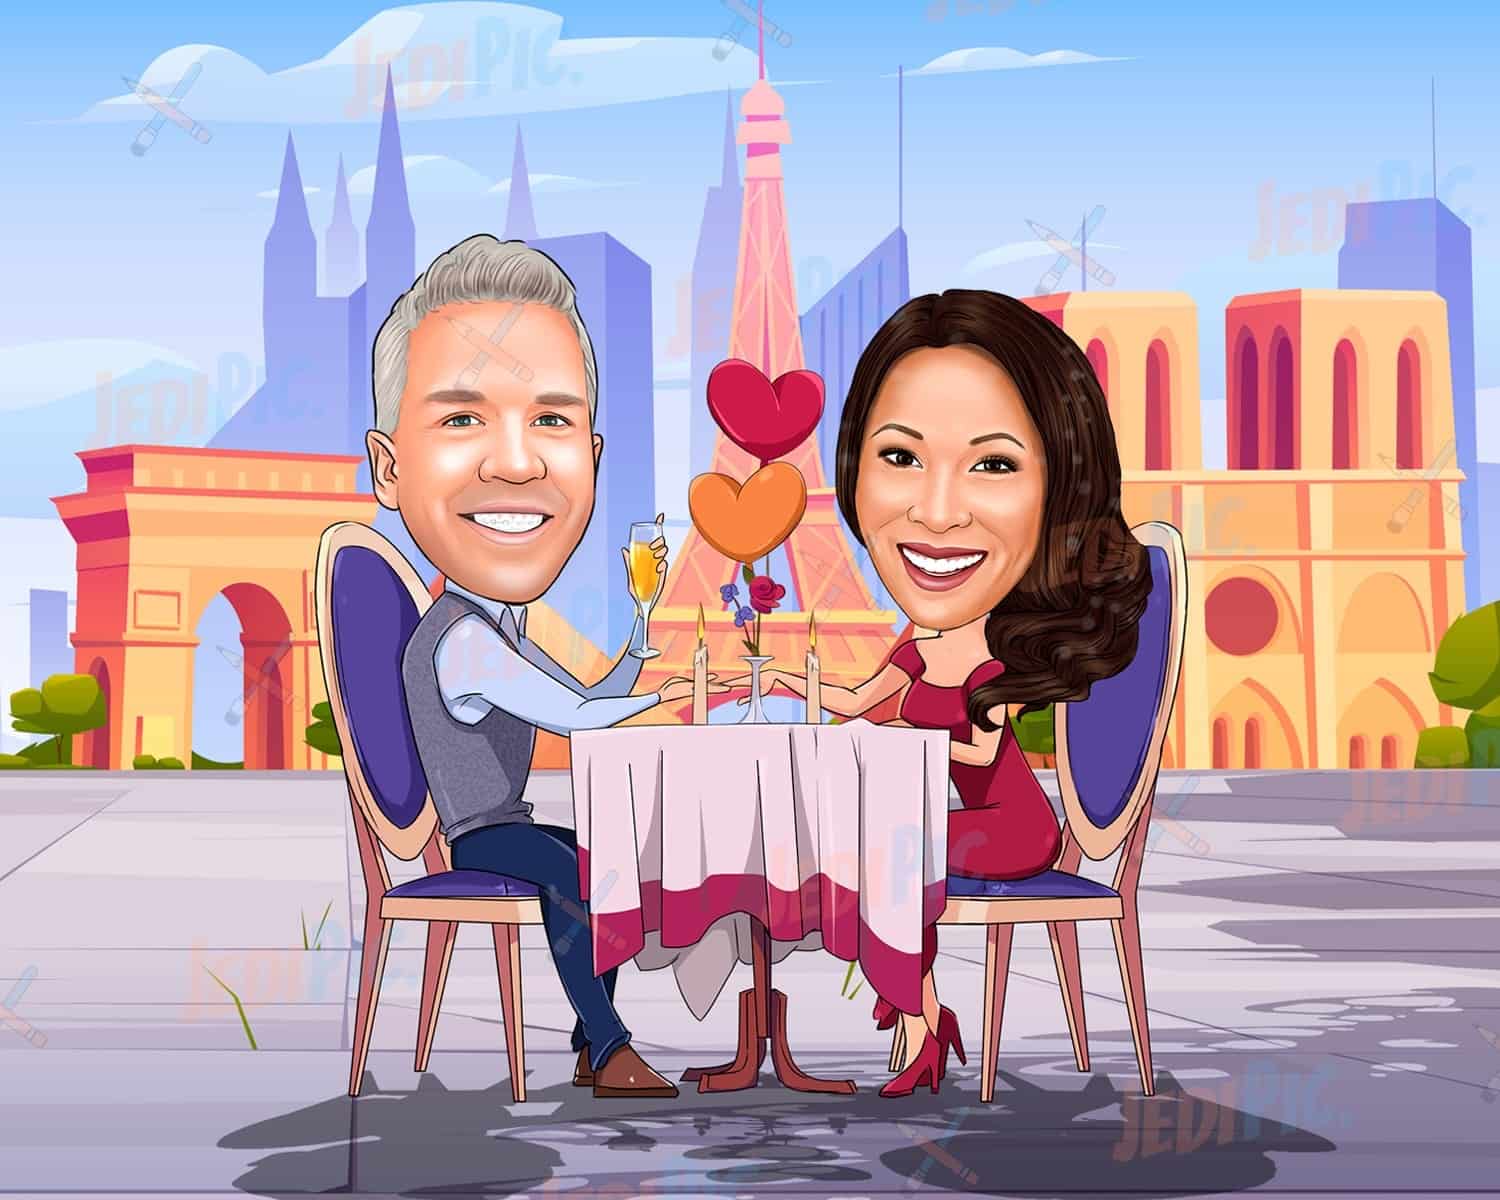 Proposal Caricature from Photos